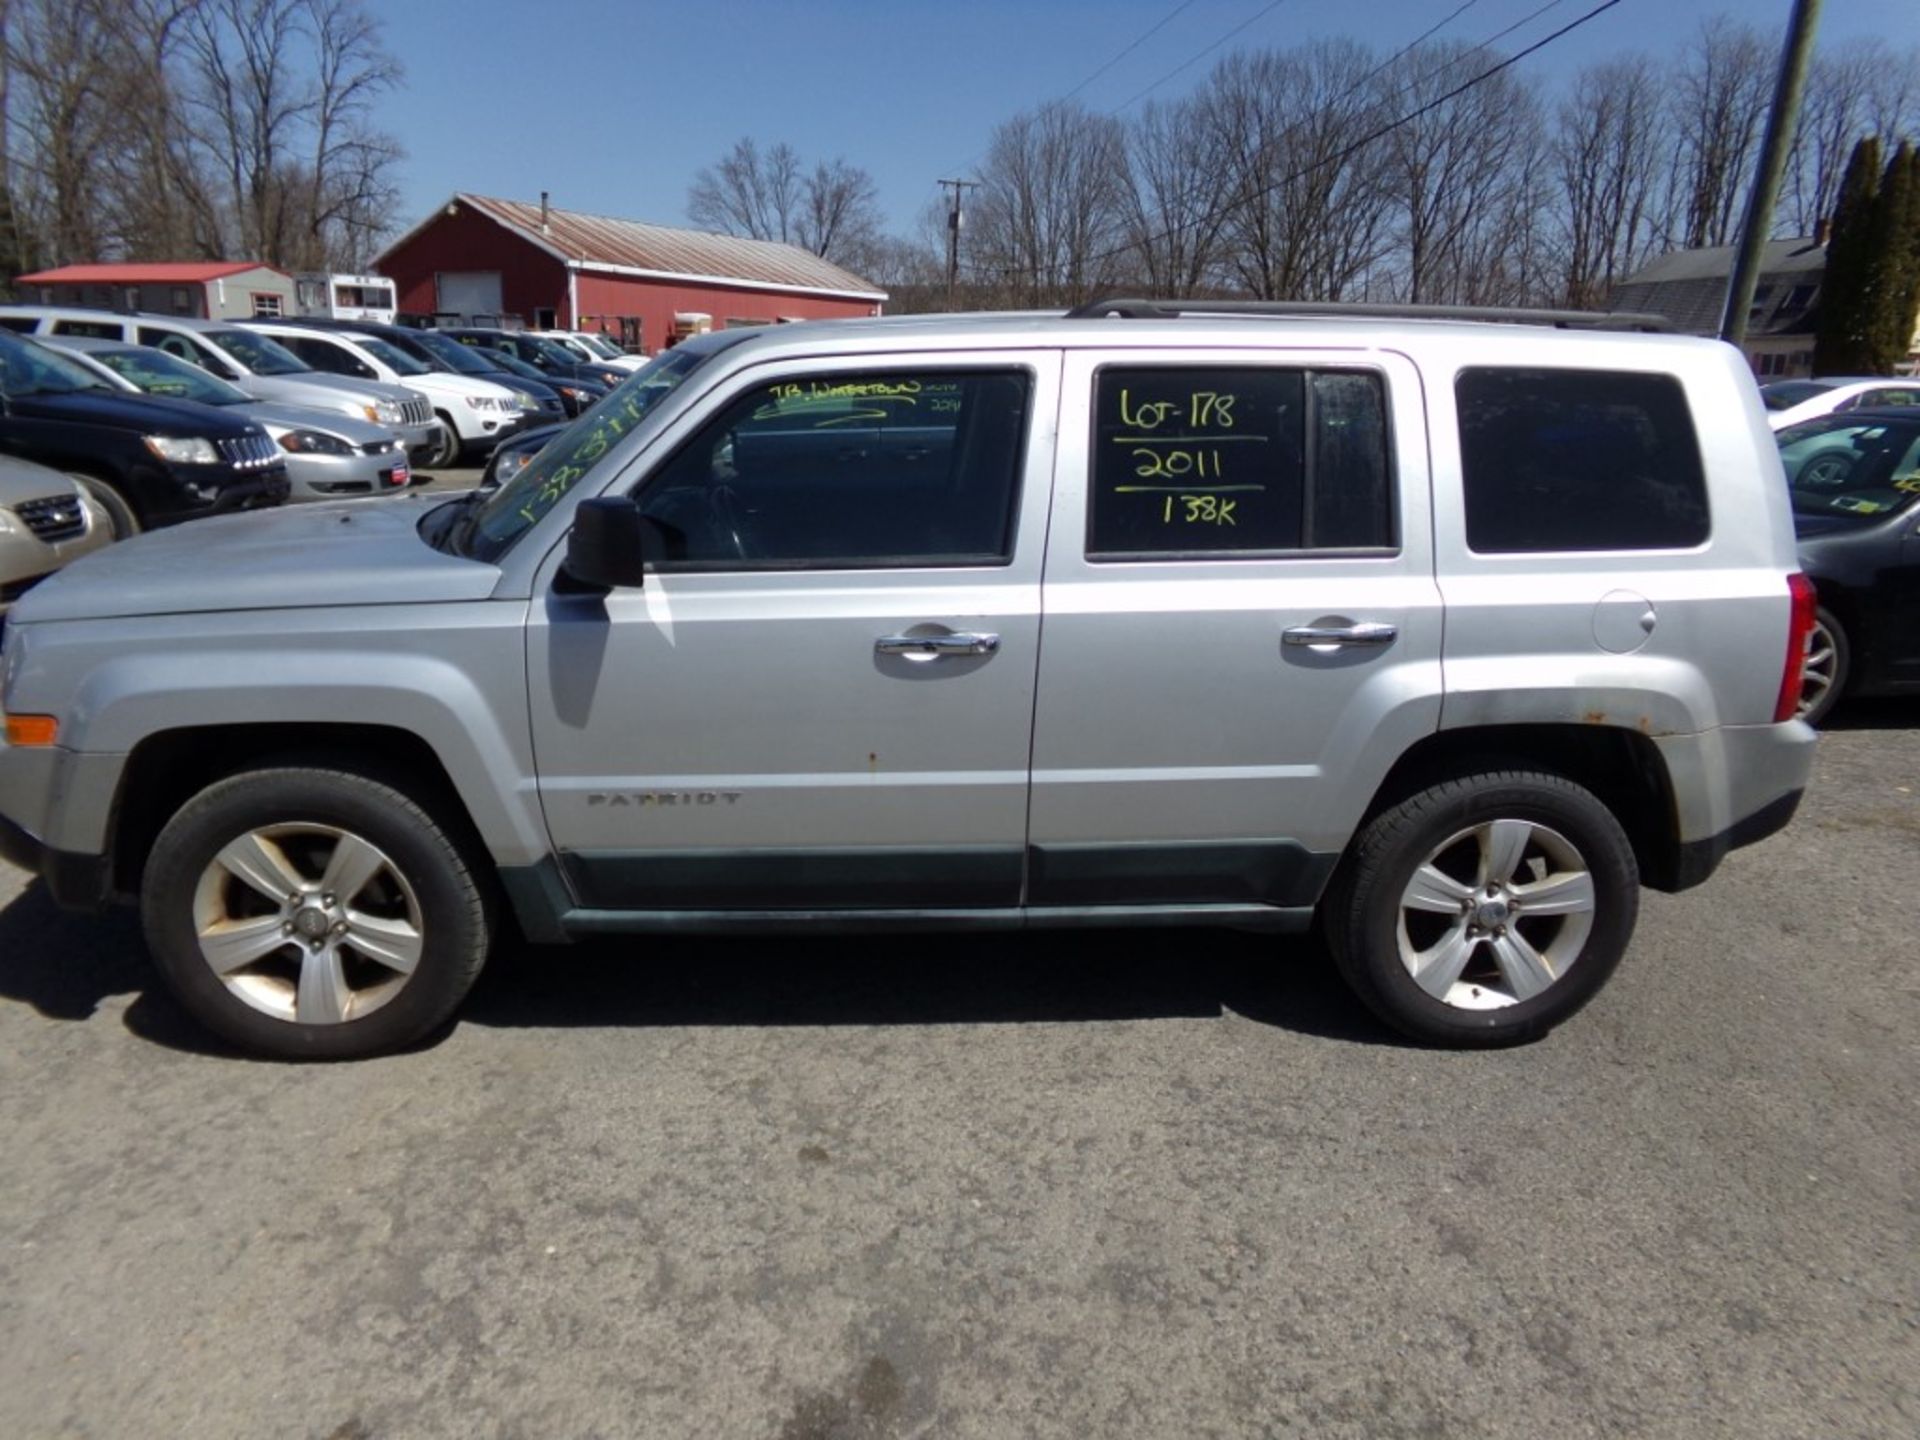 2011 Jeep Patriot Latitude 4x4, Silver, 138,349 Miles, VIN#:1J4NF1GB3BD277734, ENGINE NOISE, - Image 4 of 6